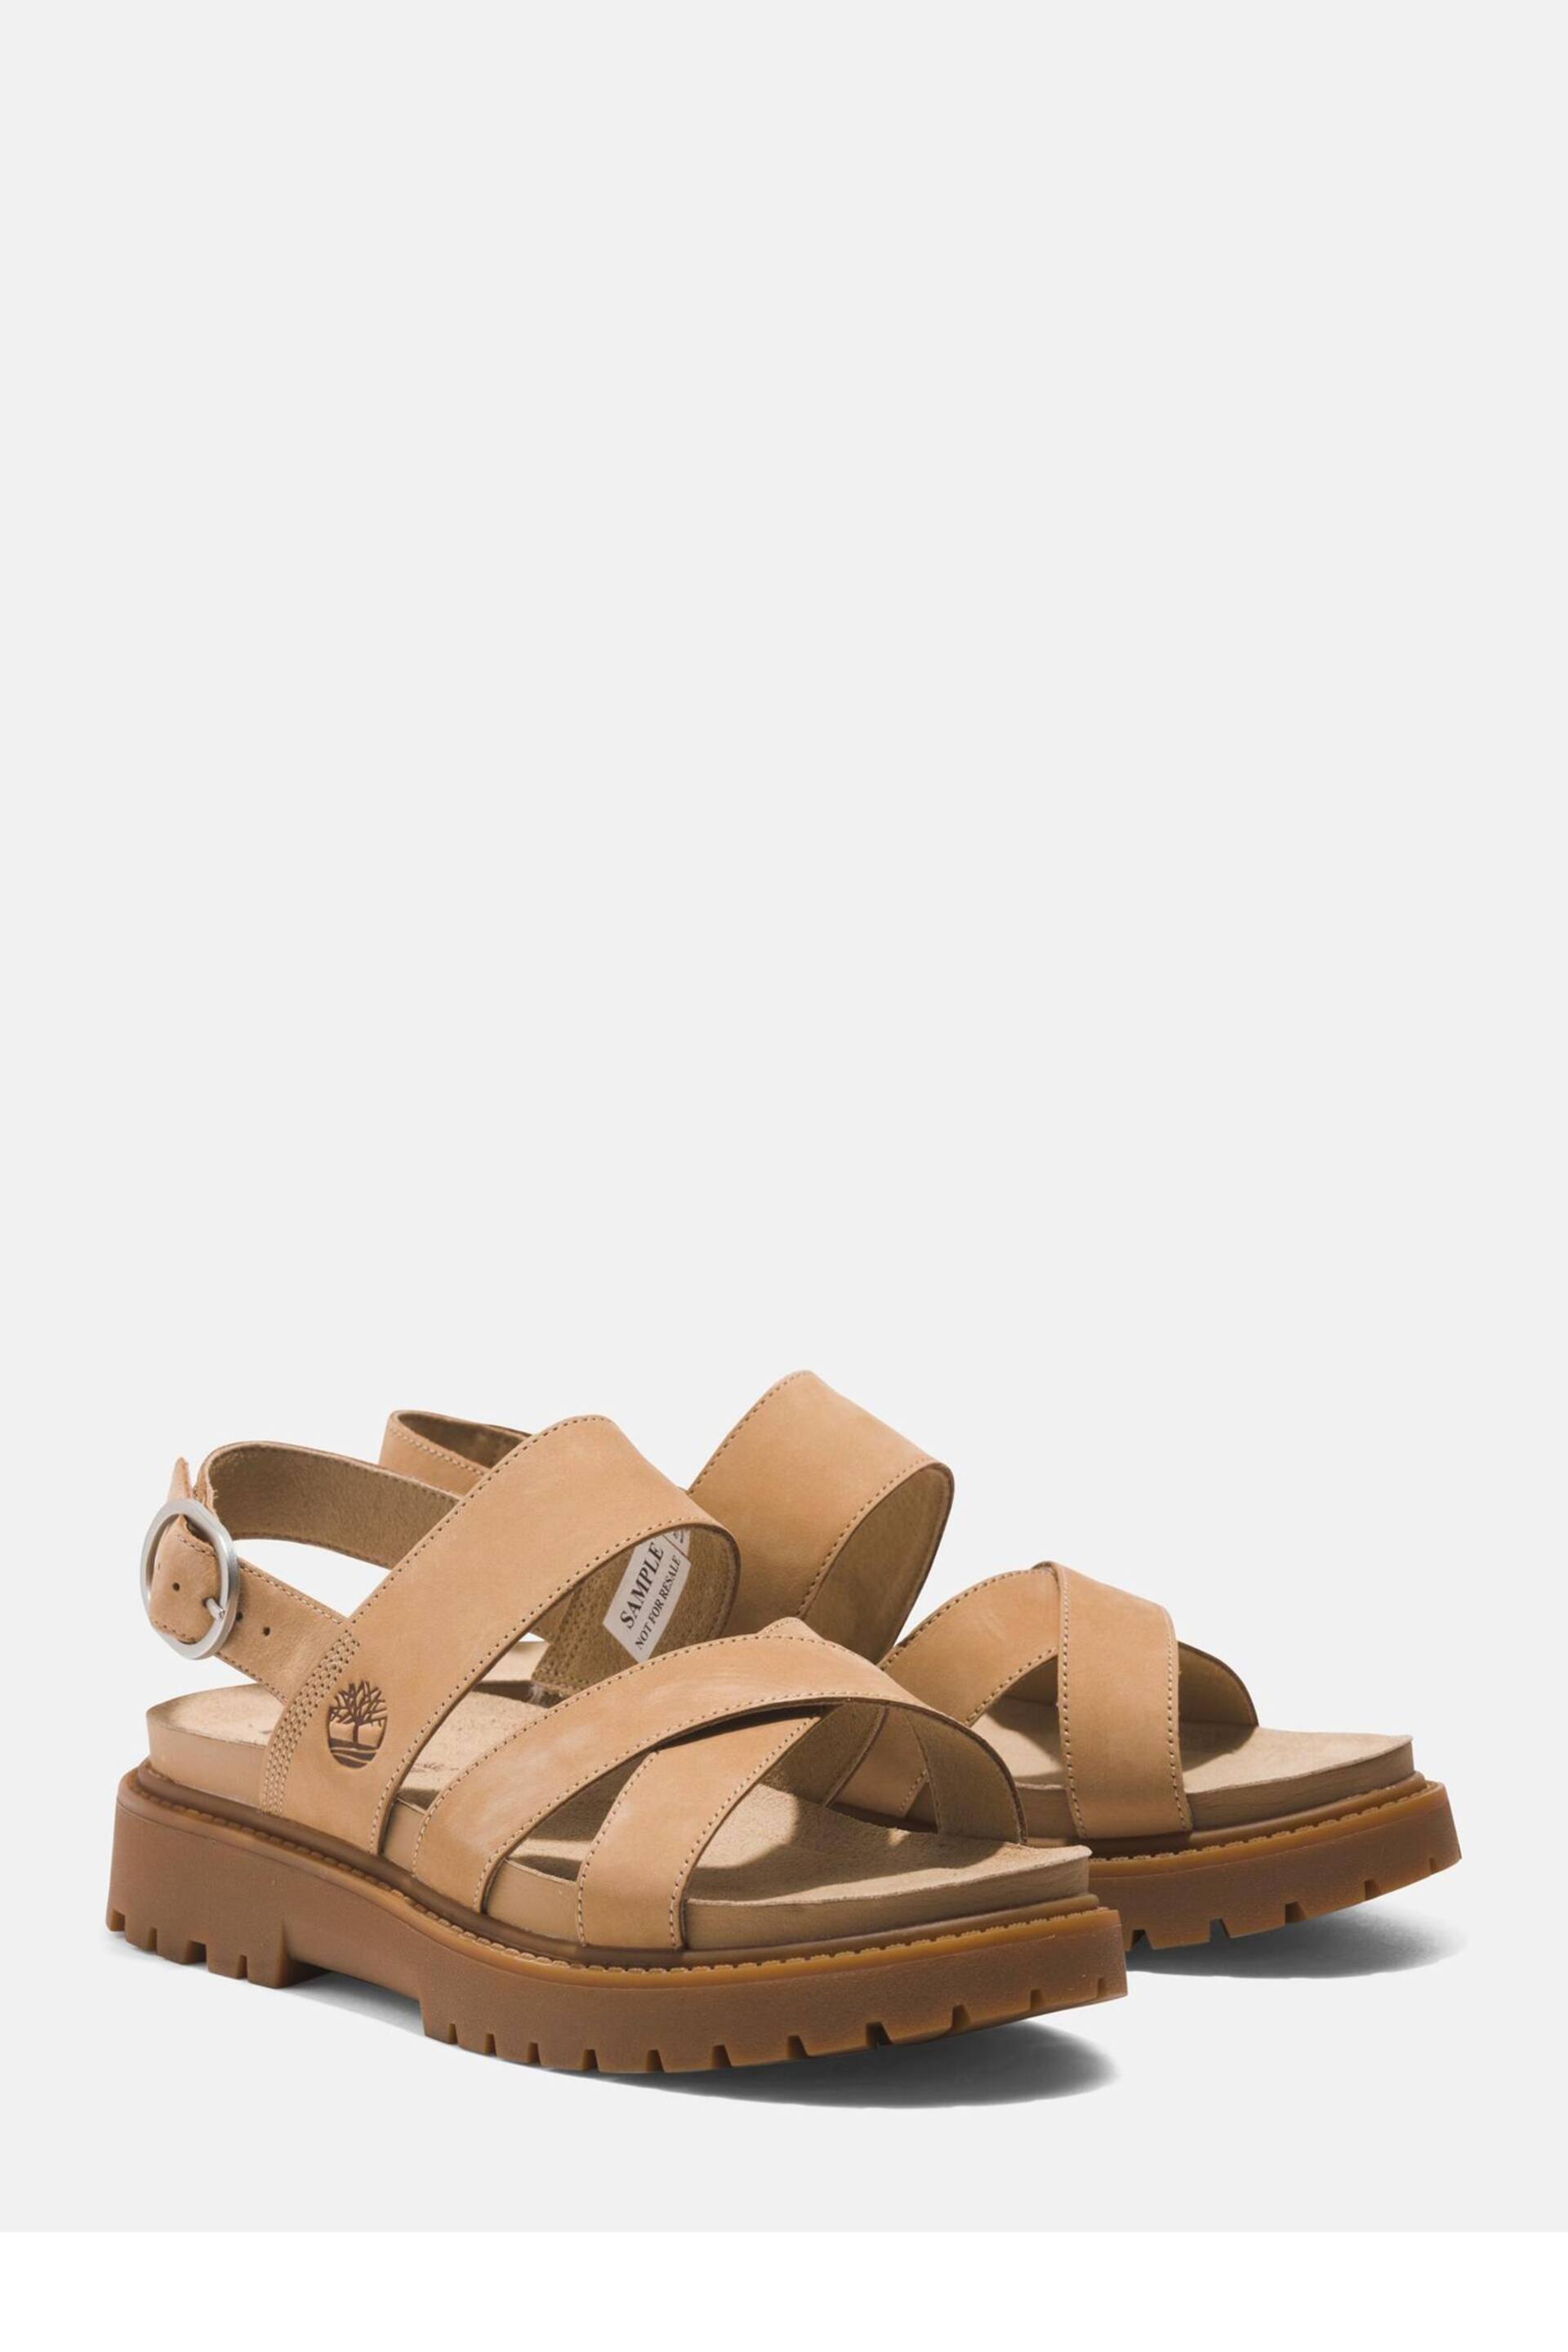 Timberland Cream Clairemont Way Cross Strap Sandals - Image 5 of 7